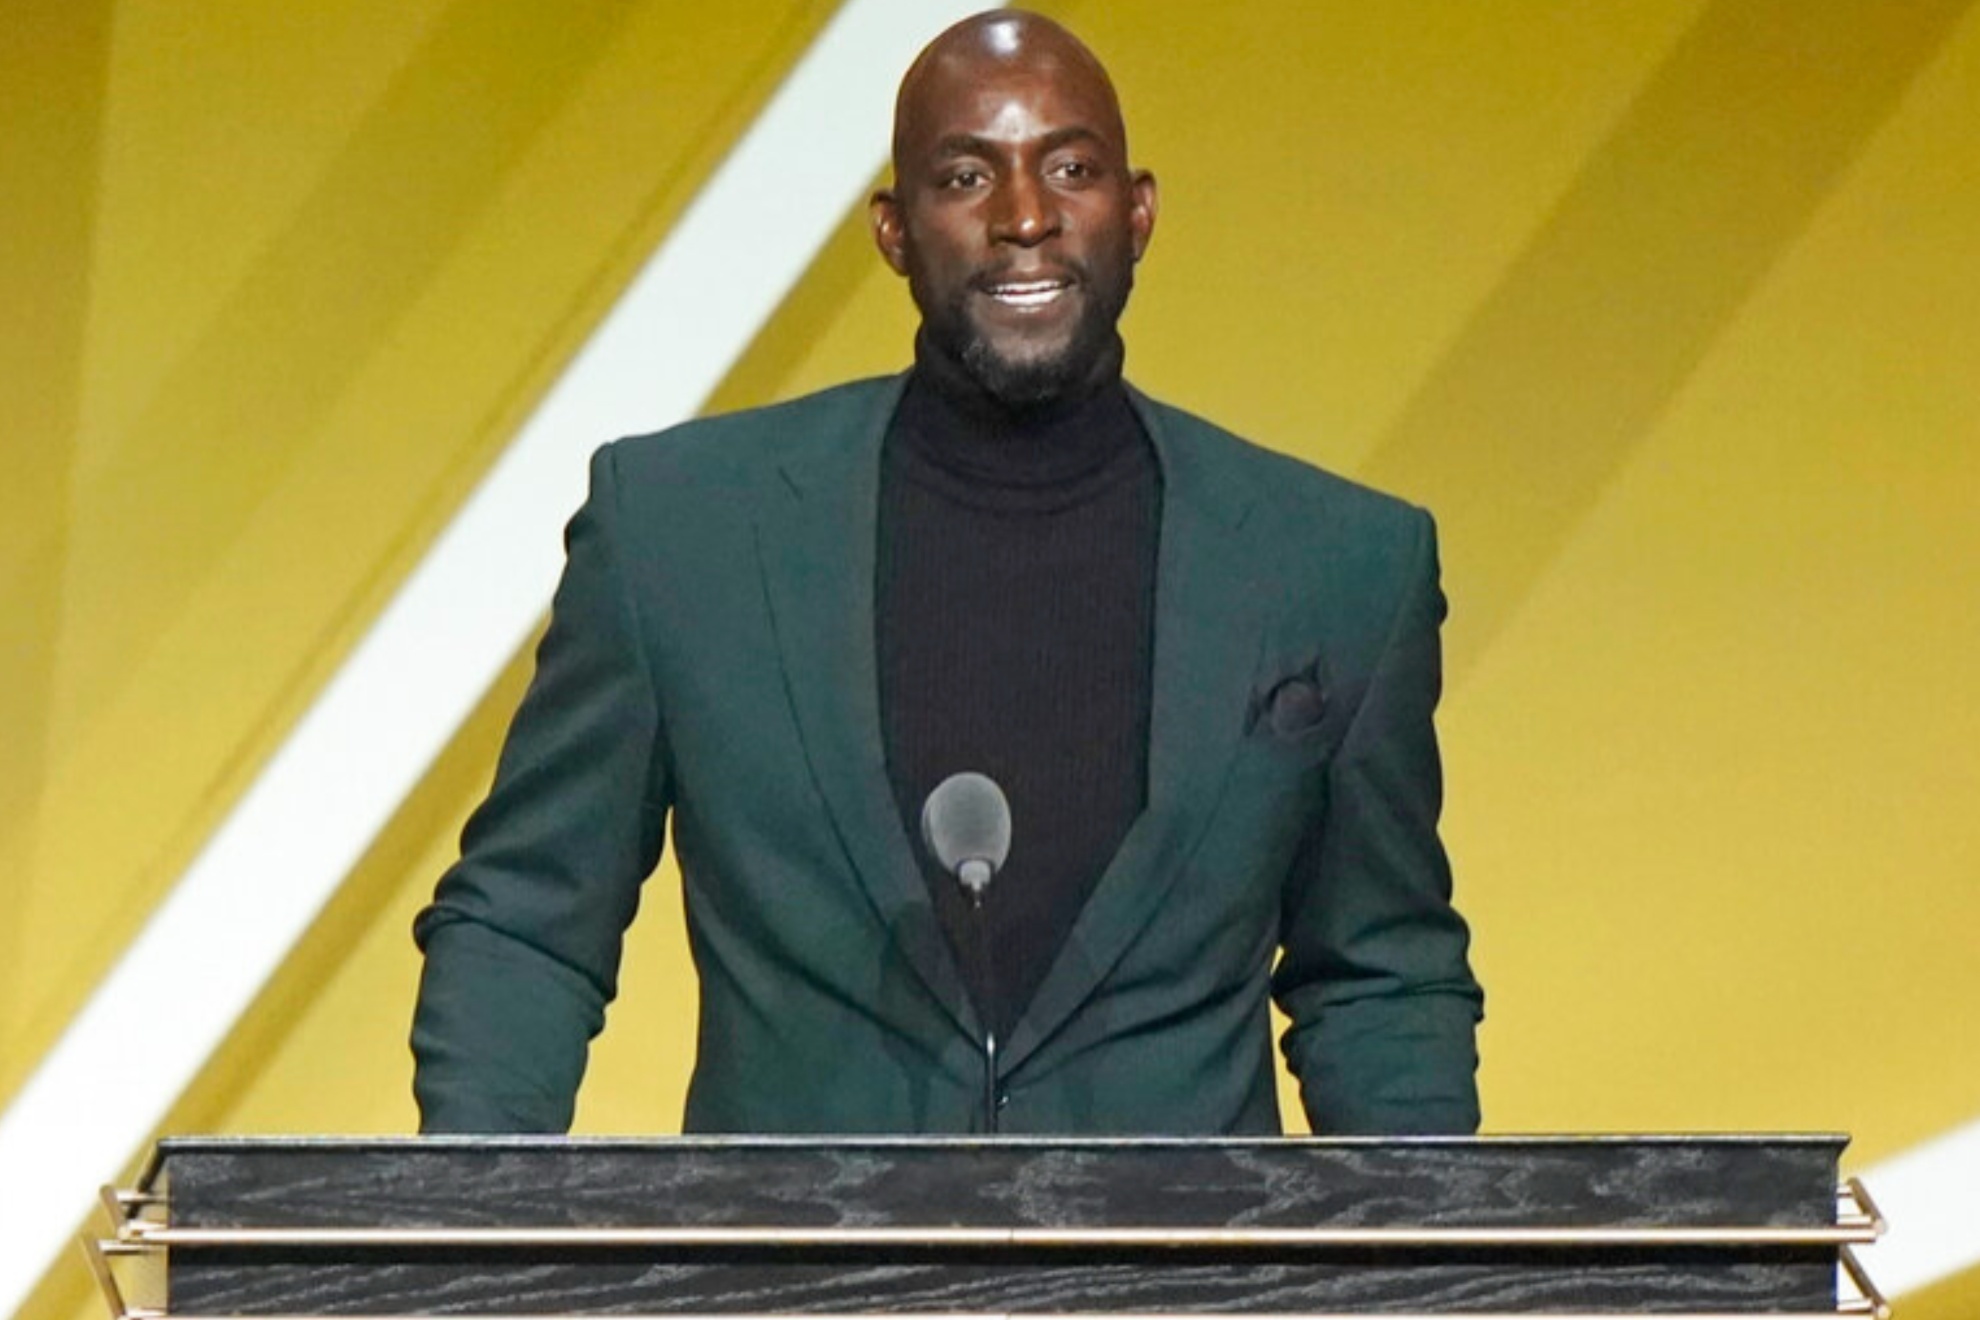 NBA legend Kevin Garnett, played for 21 years with the Timberwolves, Celtics, and Nets